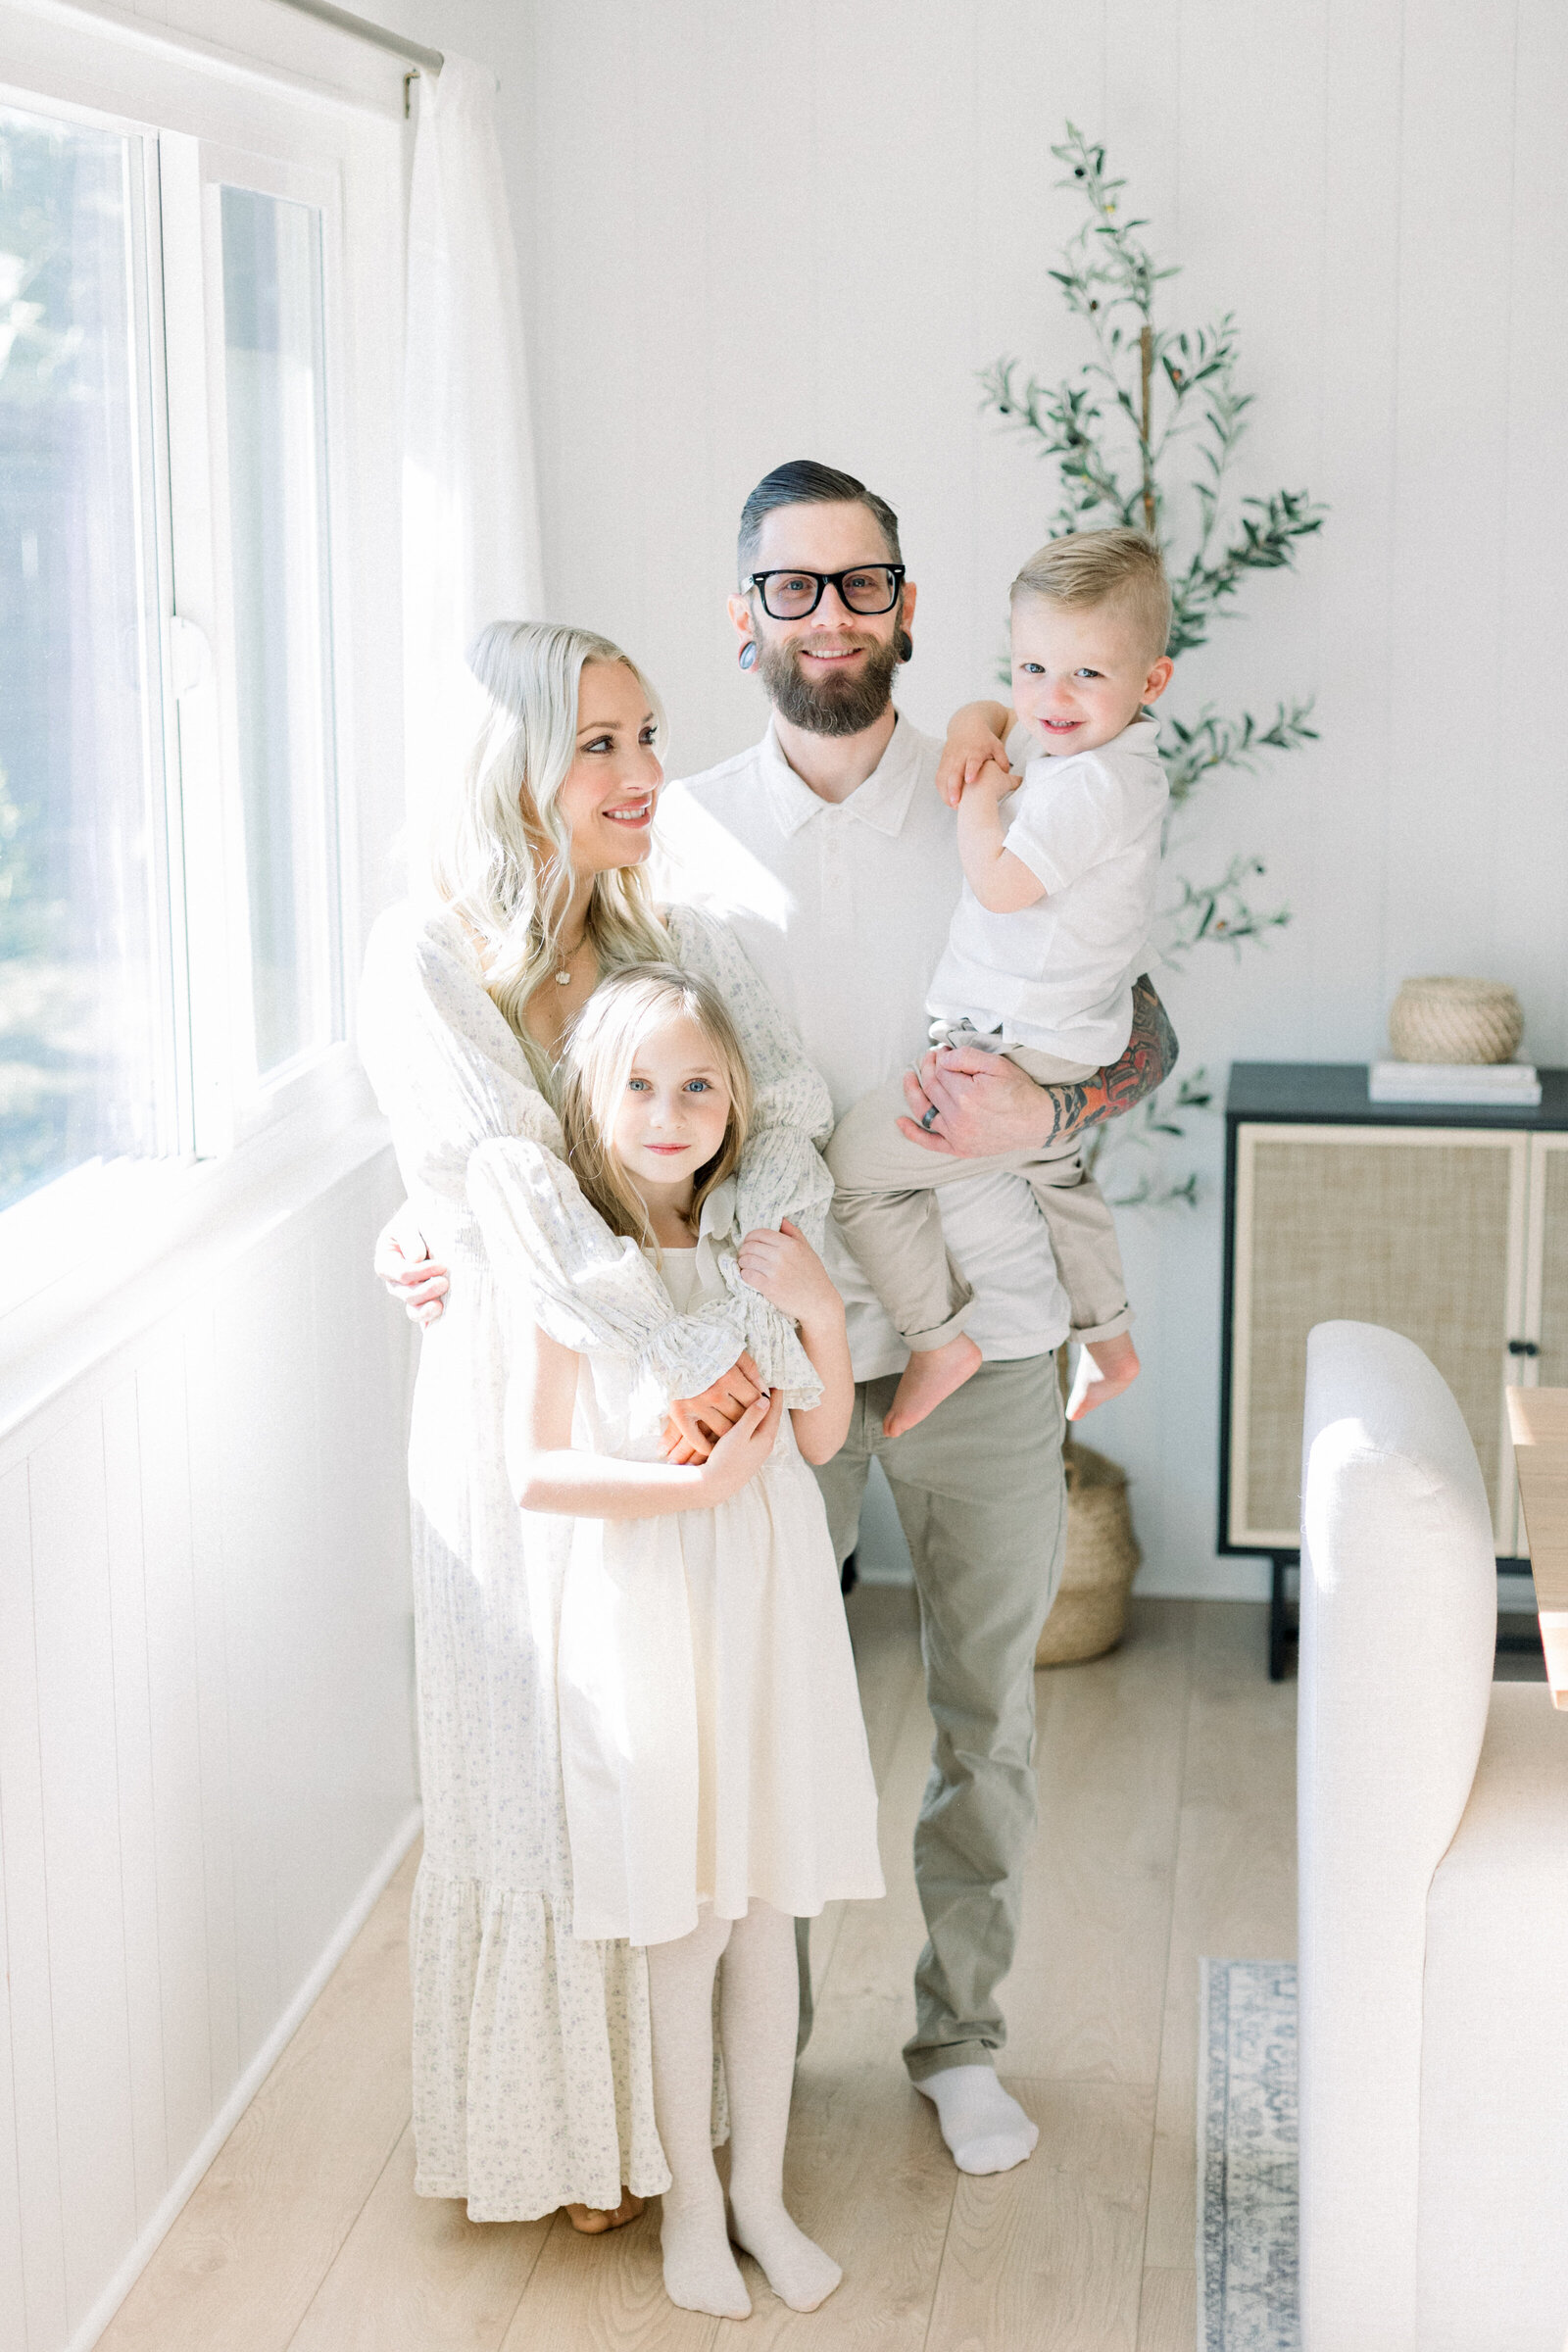 In home family portrait session of young family wearing light neutral colors taken by Family Photographer Sacramento Kelsey Krall